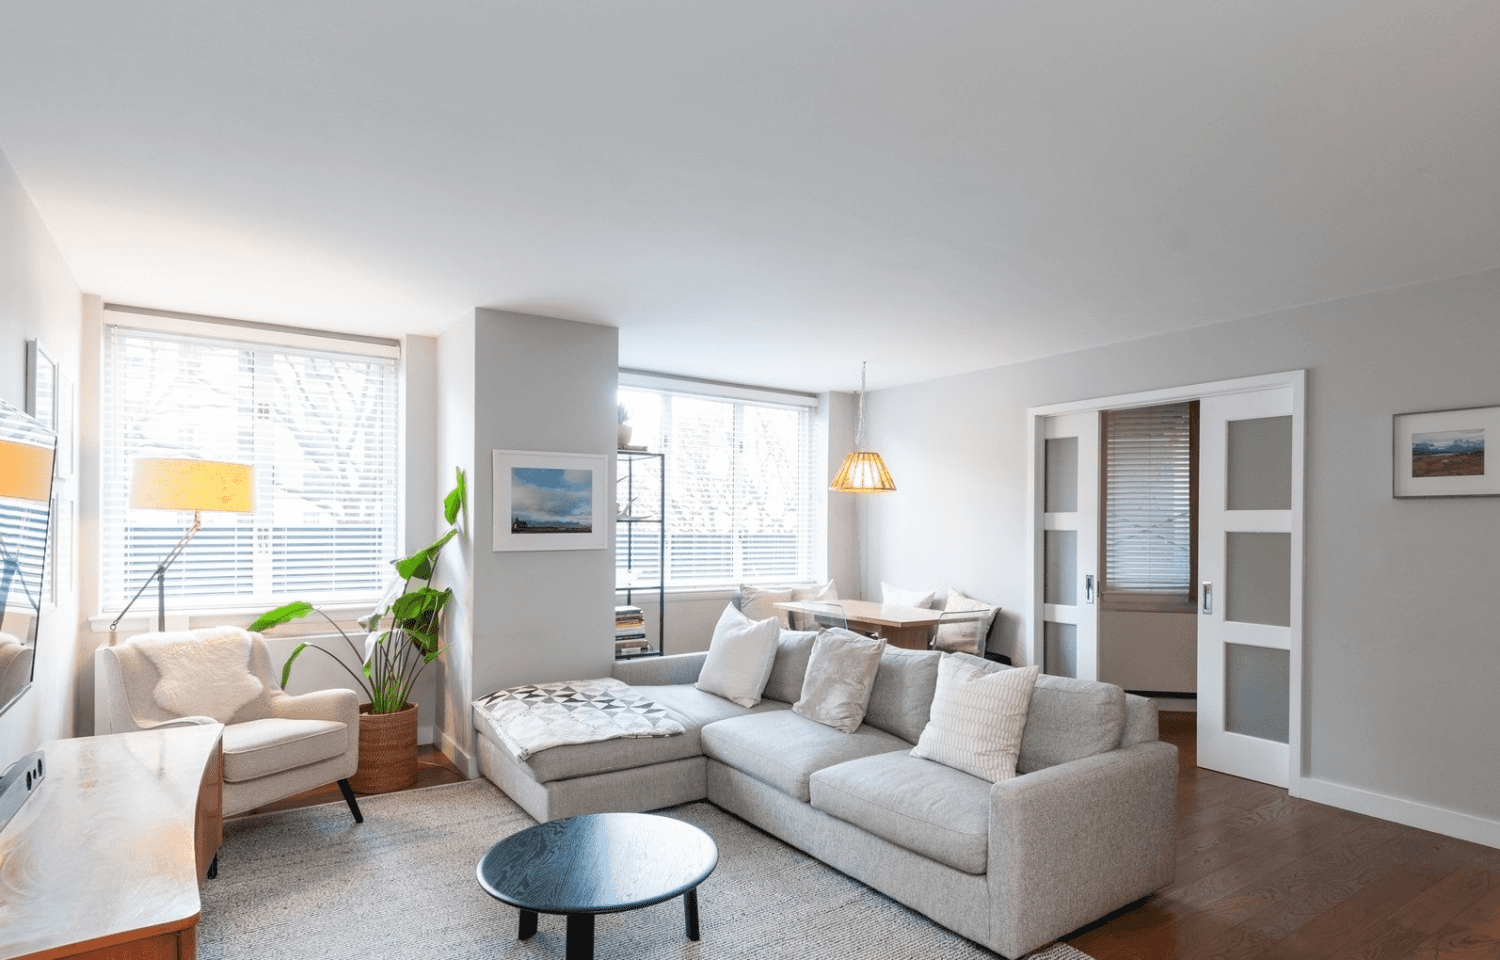 Discover luxury living in this elegant corner unit, boasting a unique layout exclusive to this residence and located within one of Battery Park City's premier condominiums.